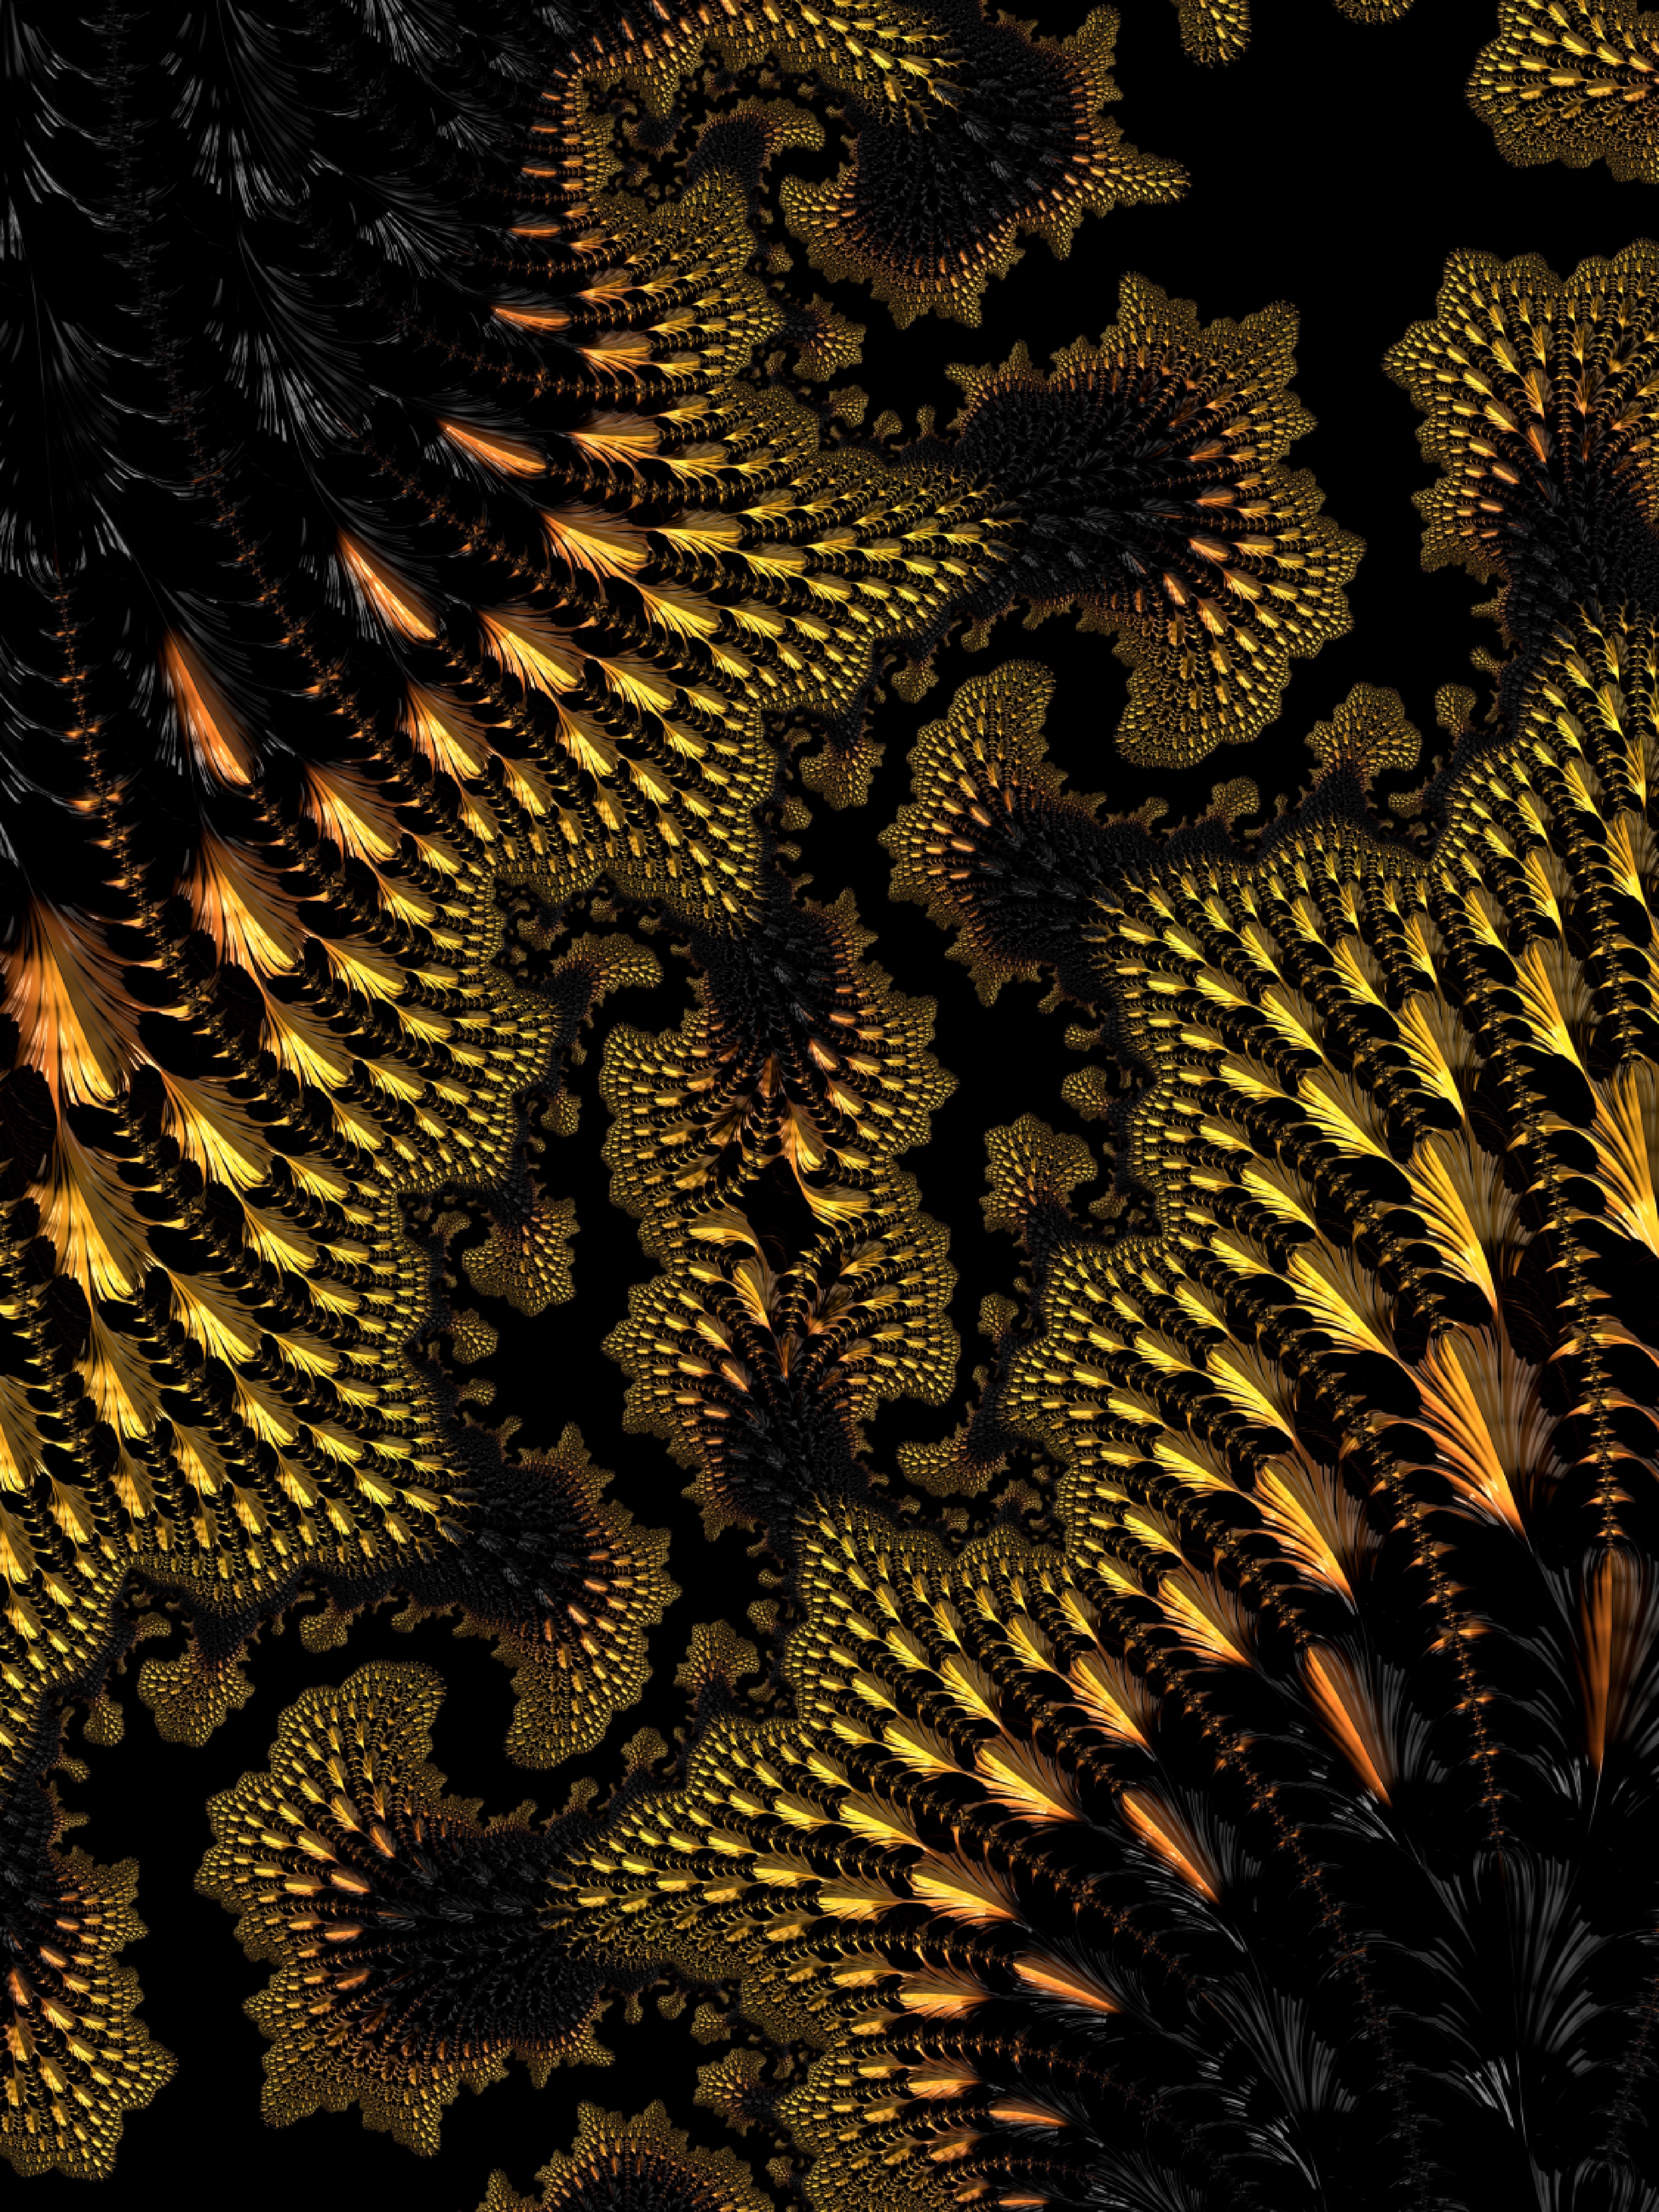 fractal, 3d, abstract, black, yellow, winding, sinuous, ornate 8K